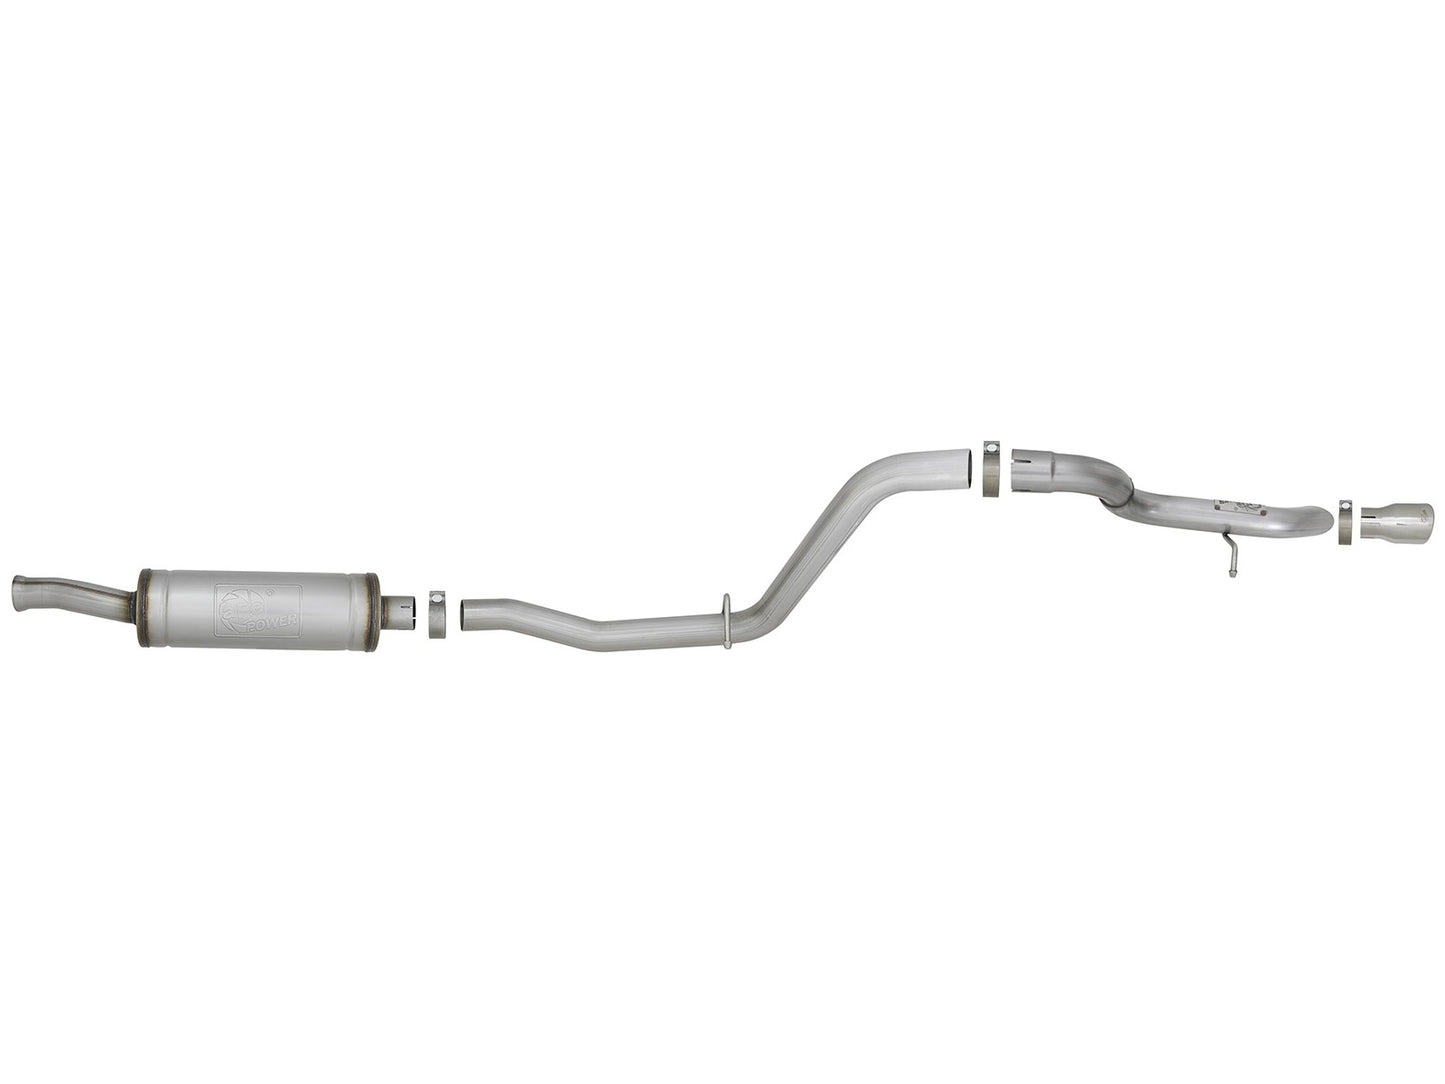 AFE POWER Mach Force-Xp 2-1/2" 409 Stainless Steel Catback Hi-Tuck Exhaust (Polished Tip) System Jeep Wrangler (JL) 2018-2020